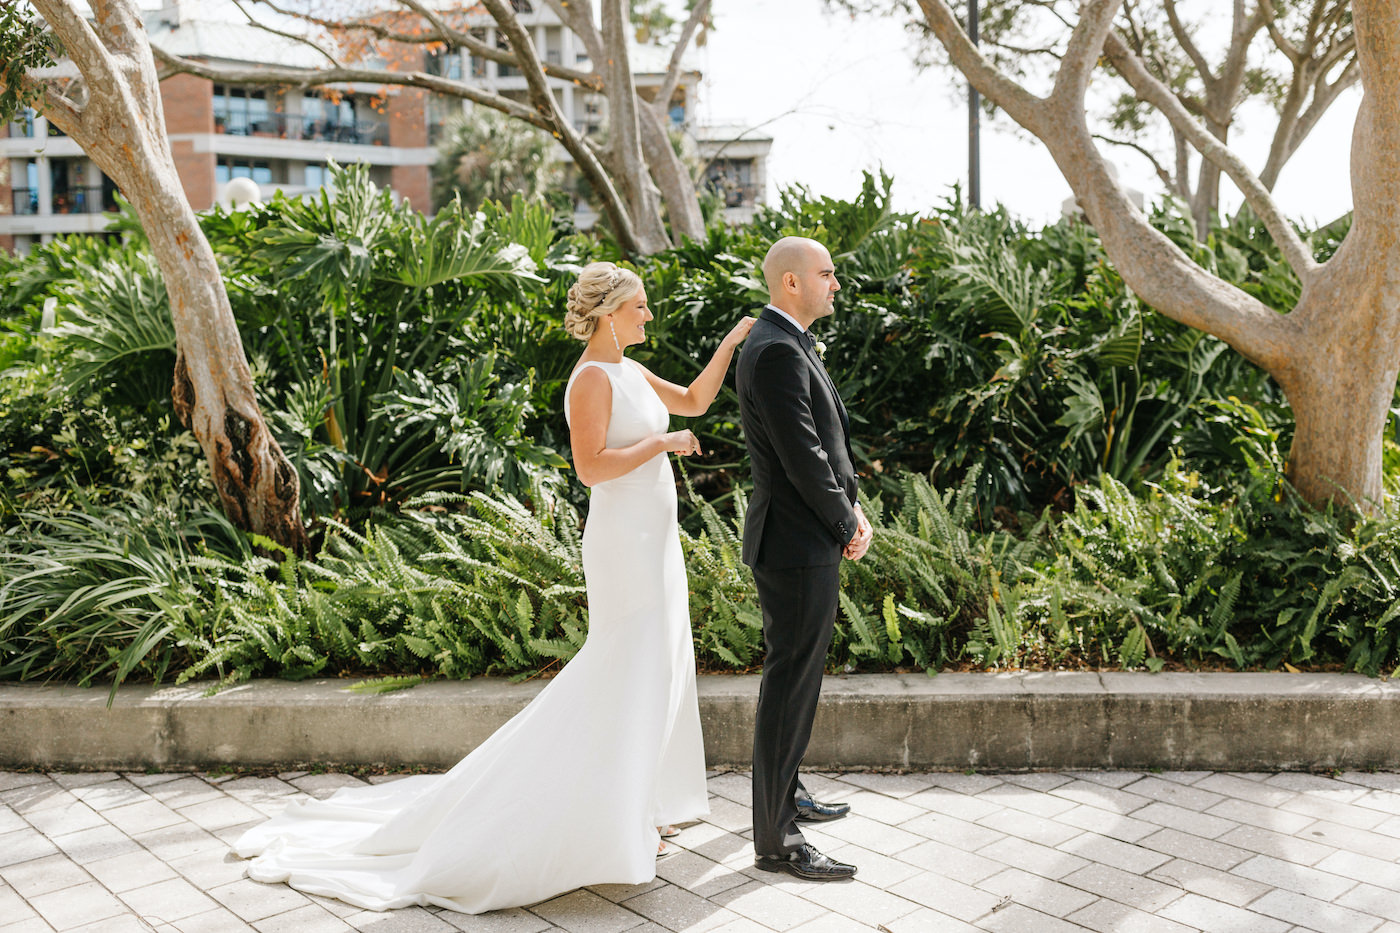 Bride and Groom Outdoor First Look | Simple Sheath Ivory Crepe Bateau Neck Low Back Bridal Gown by Theia | Groom in Classic Black Tux Suit with Bow Tie